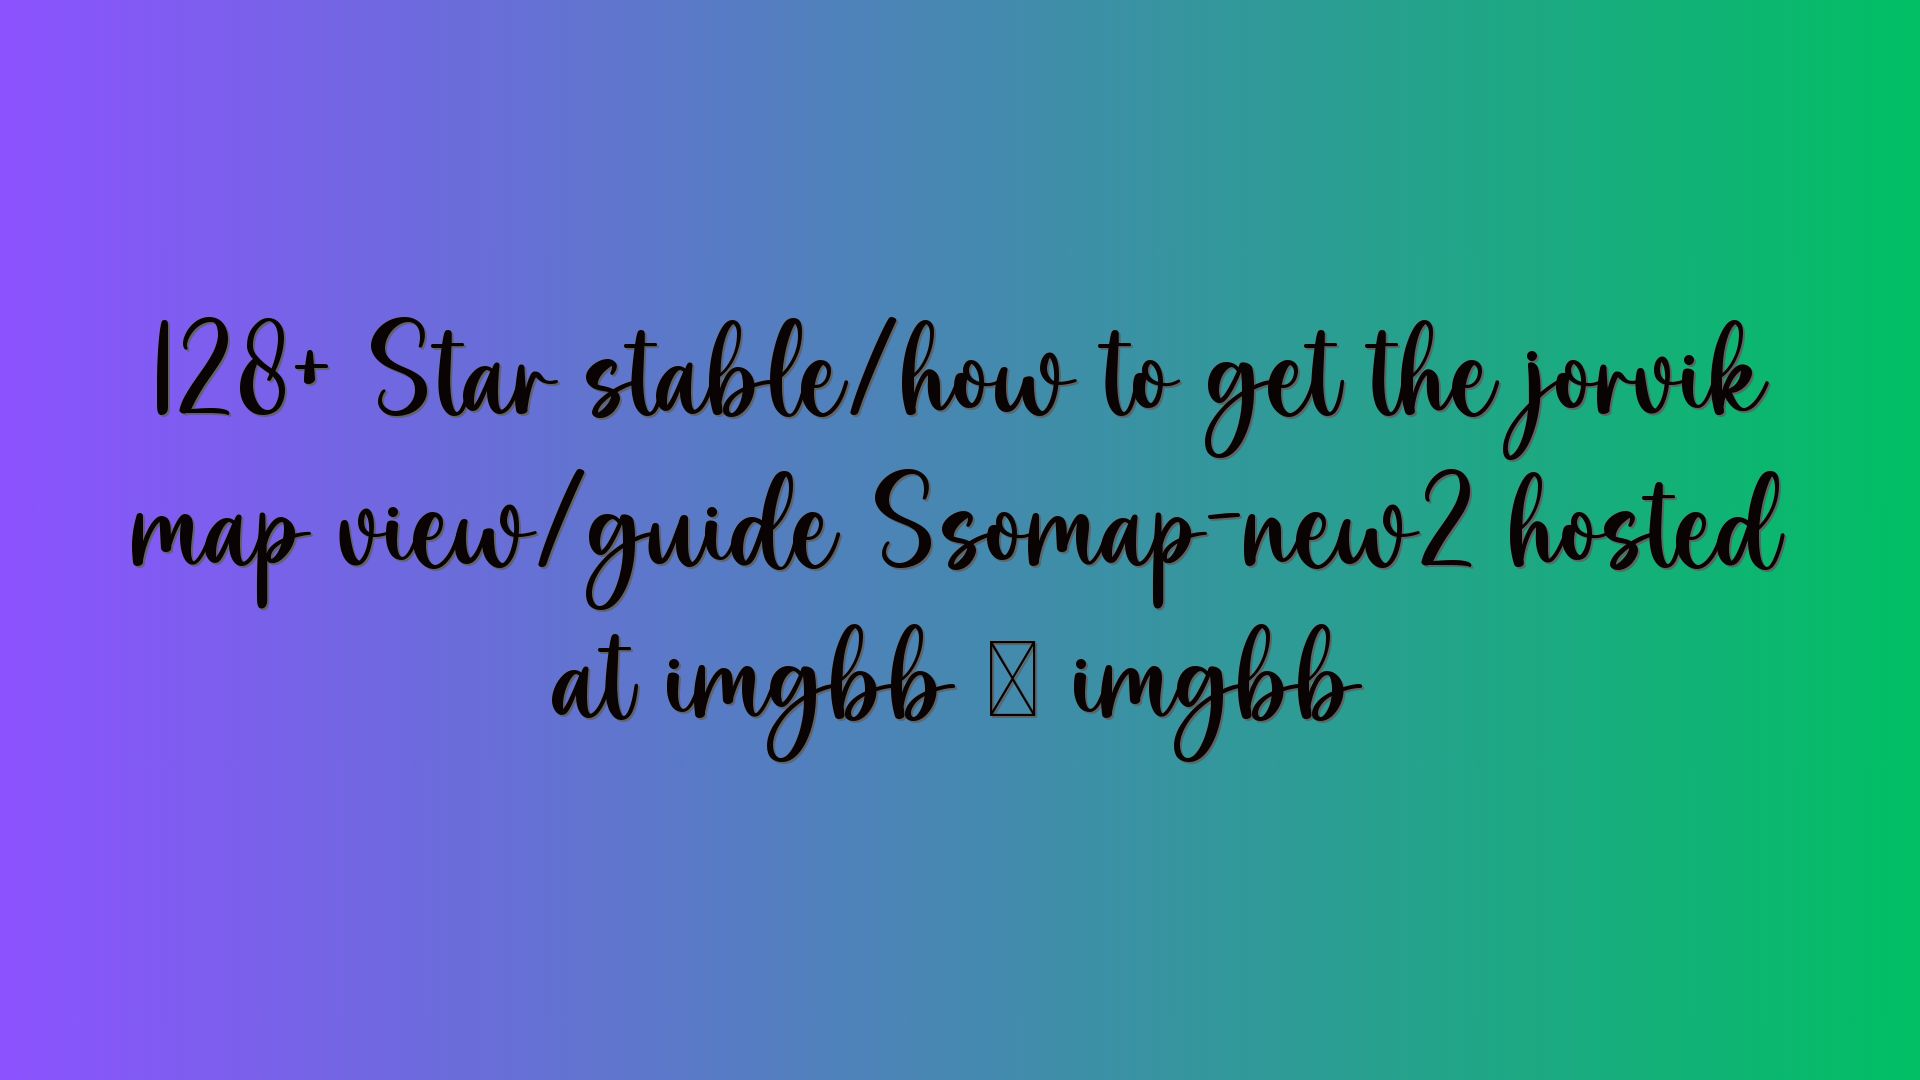 128+ Star stable/how to get the jorvik map view/guide Ssomap-new2 hosted at imgbb — imgbb